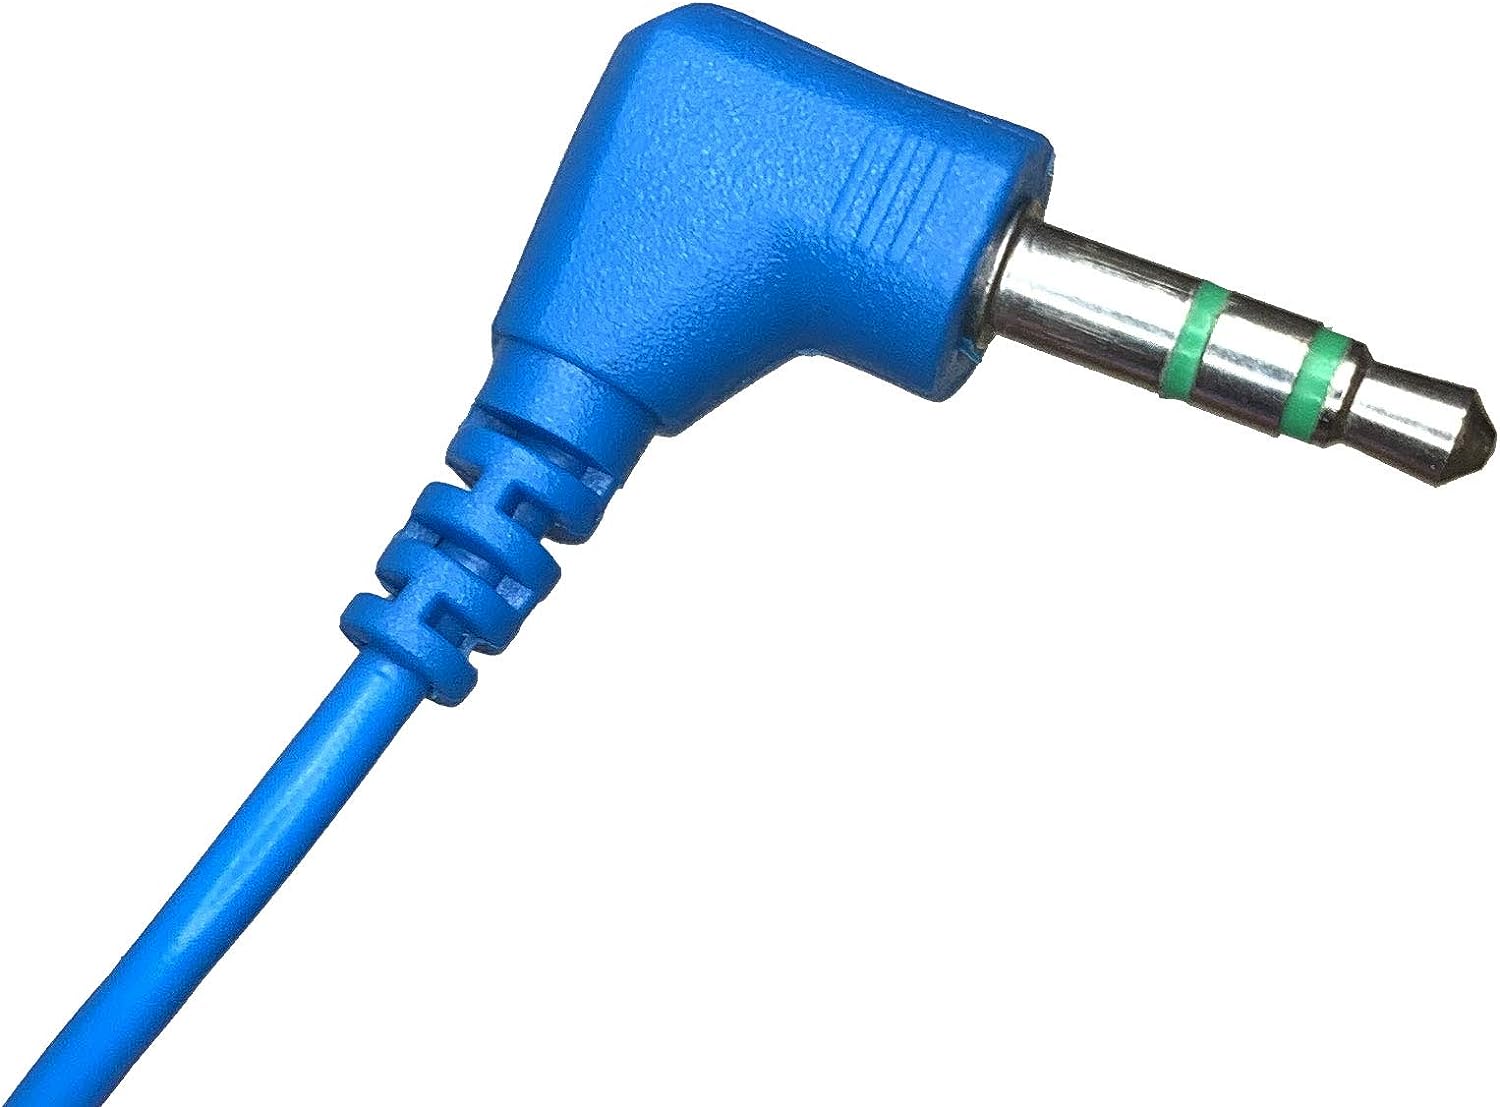 3.5 MM plug compatible with multiple devices